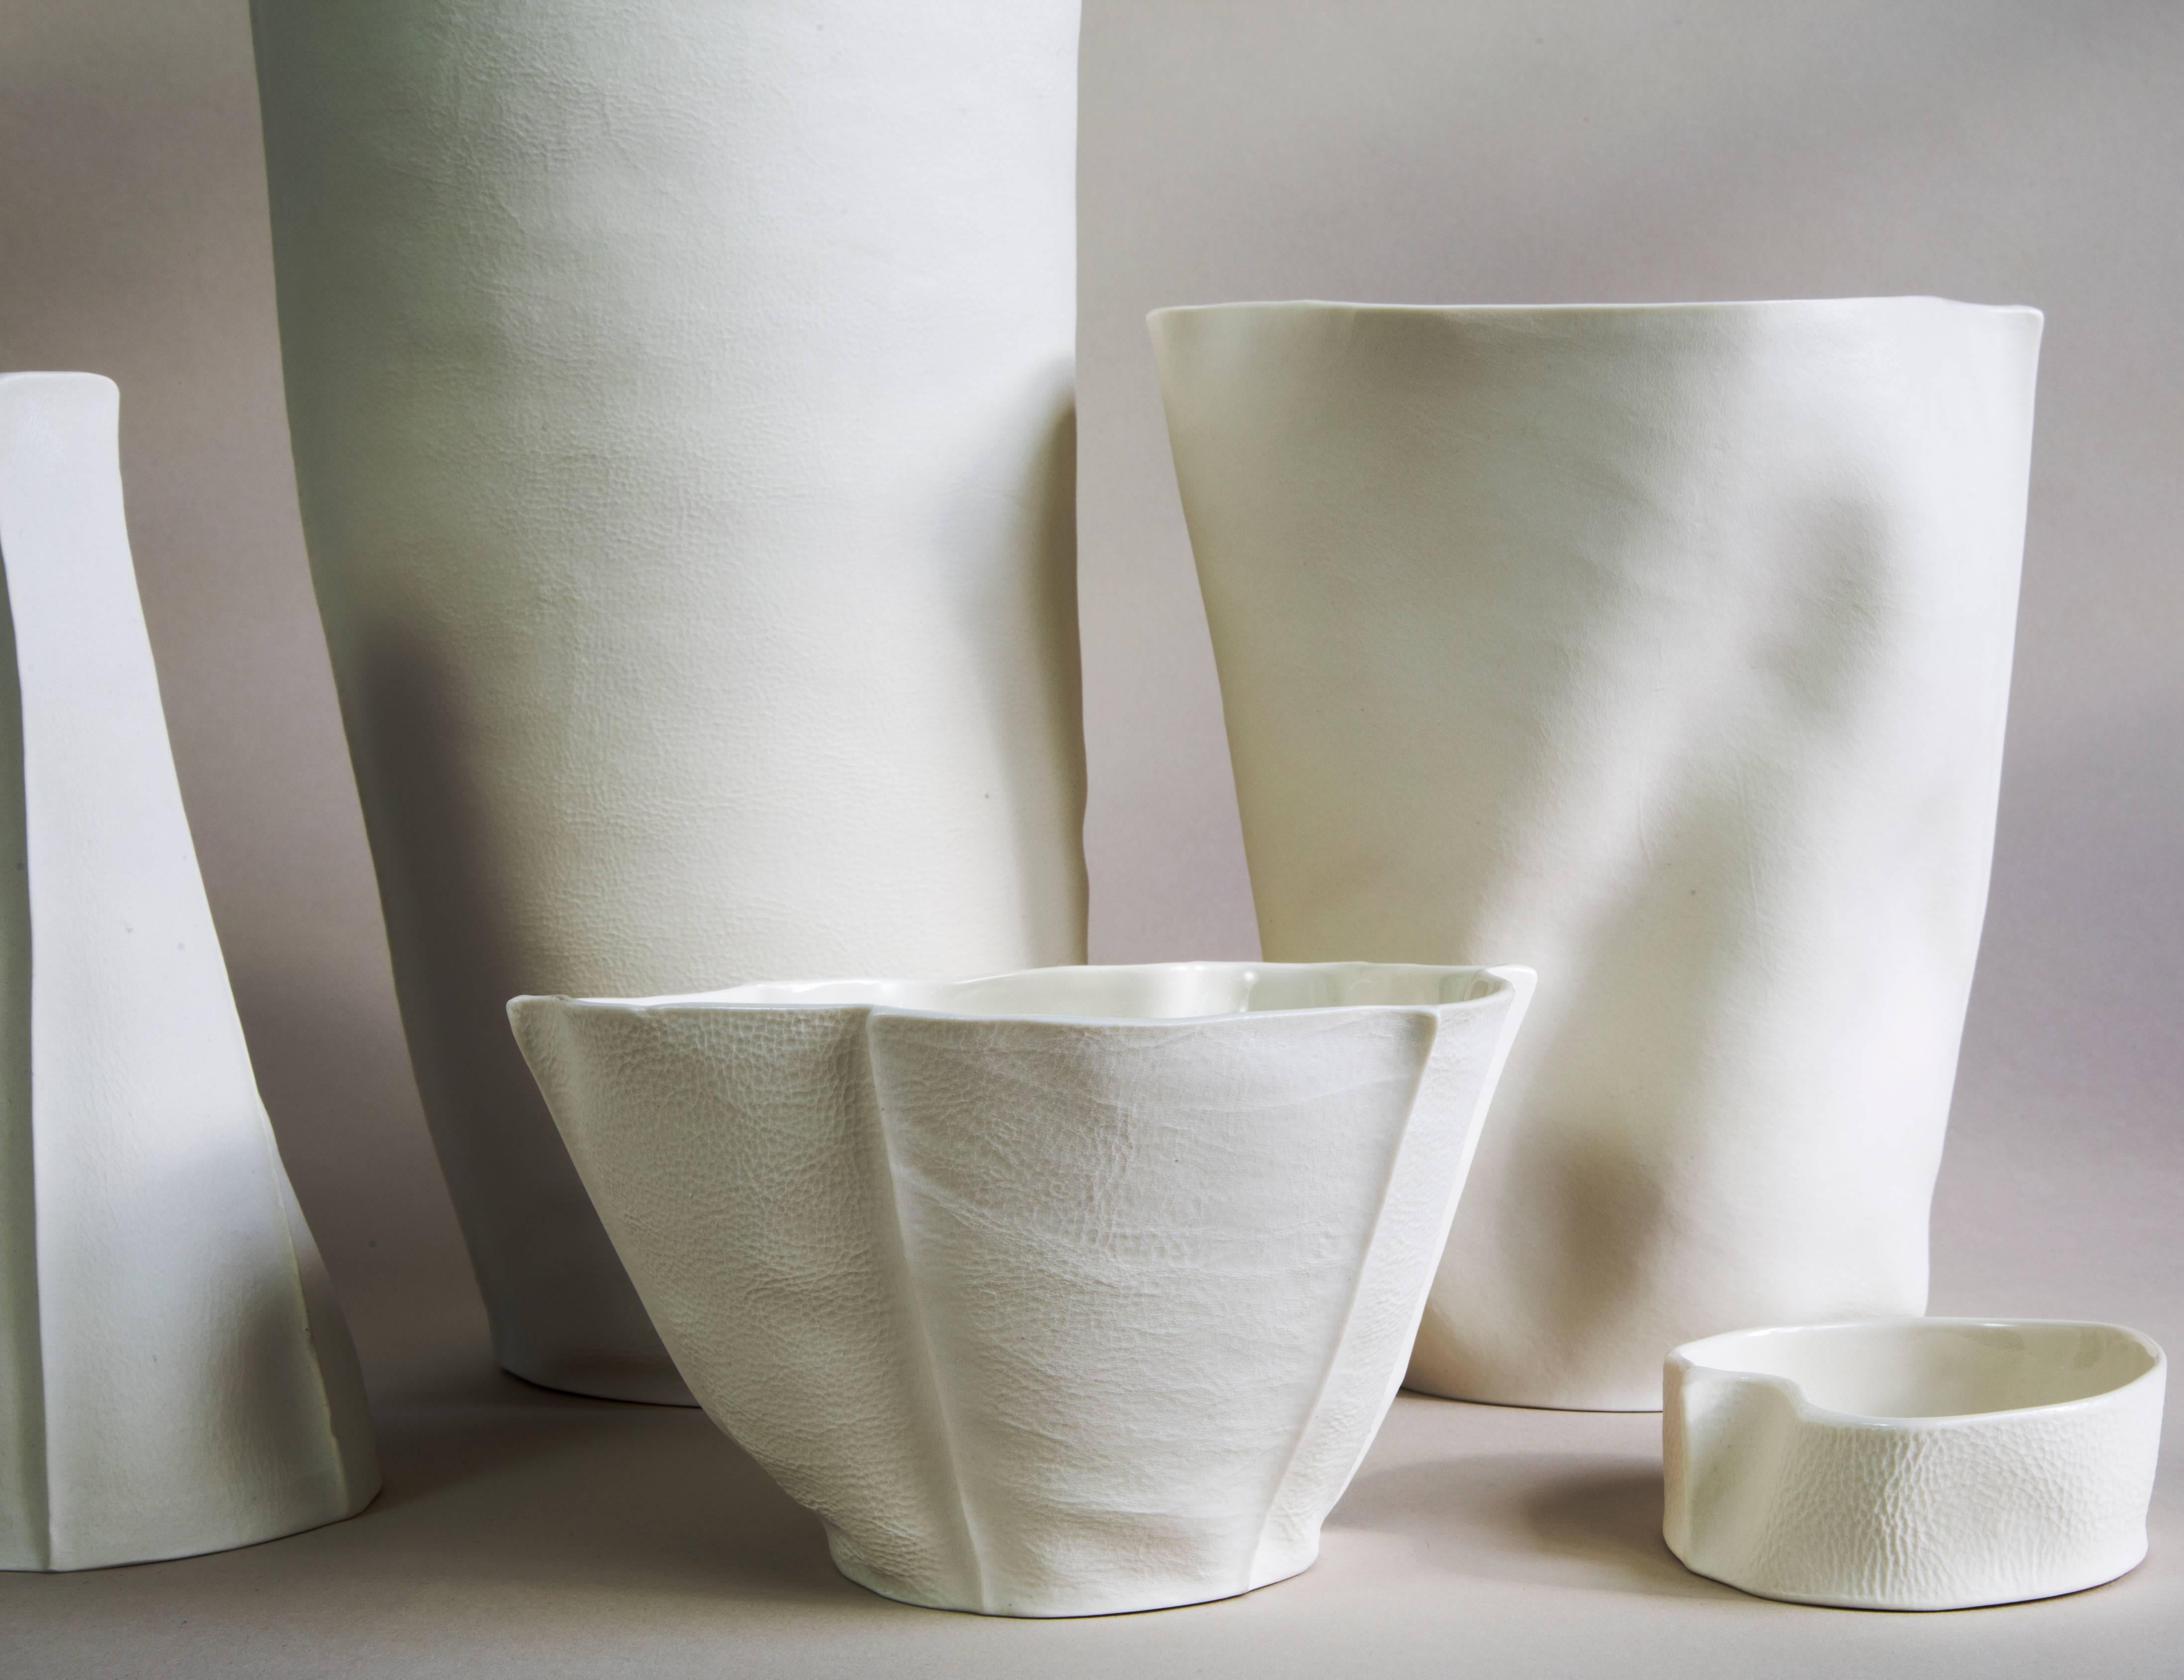 This listing is for a set of five pieces from the Kawa Porcelain series designed/made by Souda's Co-Owner, Luft Tanaka. Each piece has been made by casting liquid porcelain into a molds made entirely of leather. This highly-unique casting method